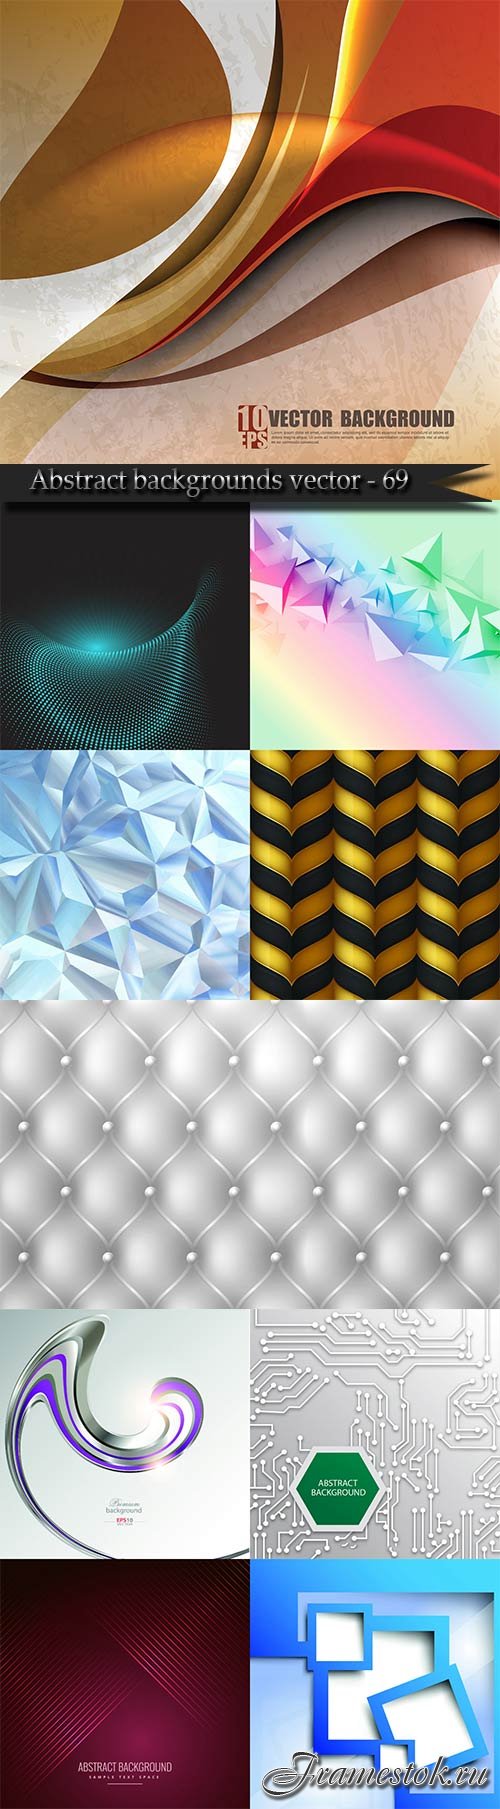 Bright colorful abstract backgrounds vector - 69